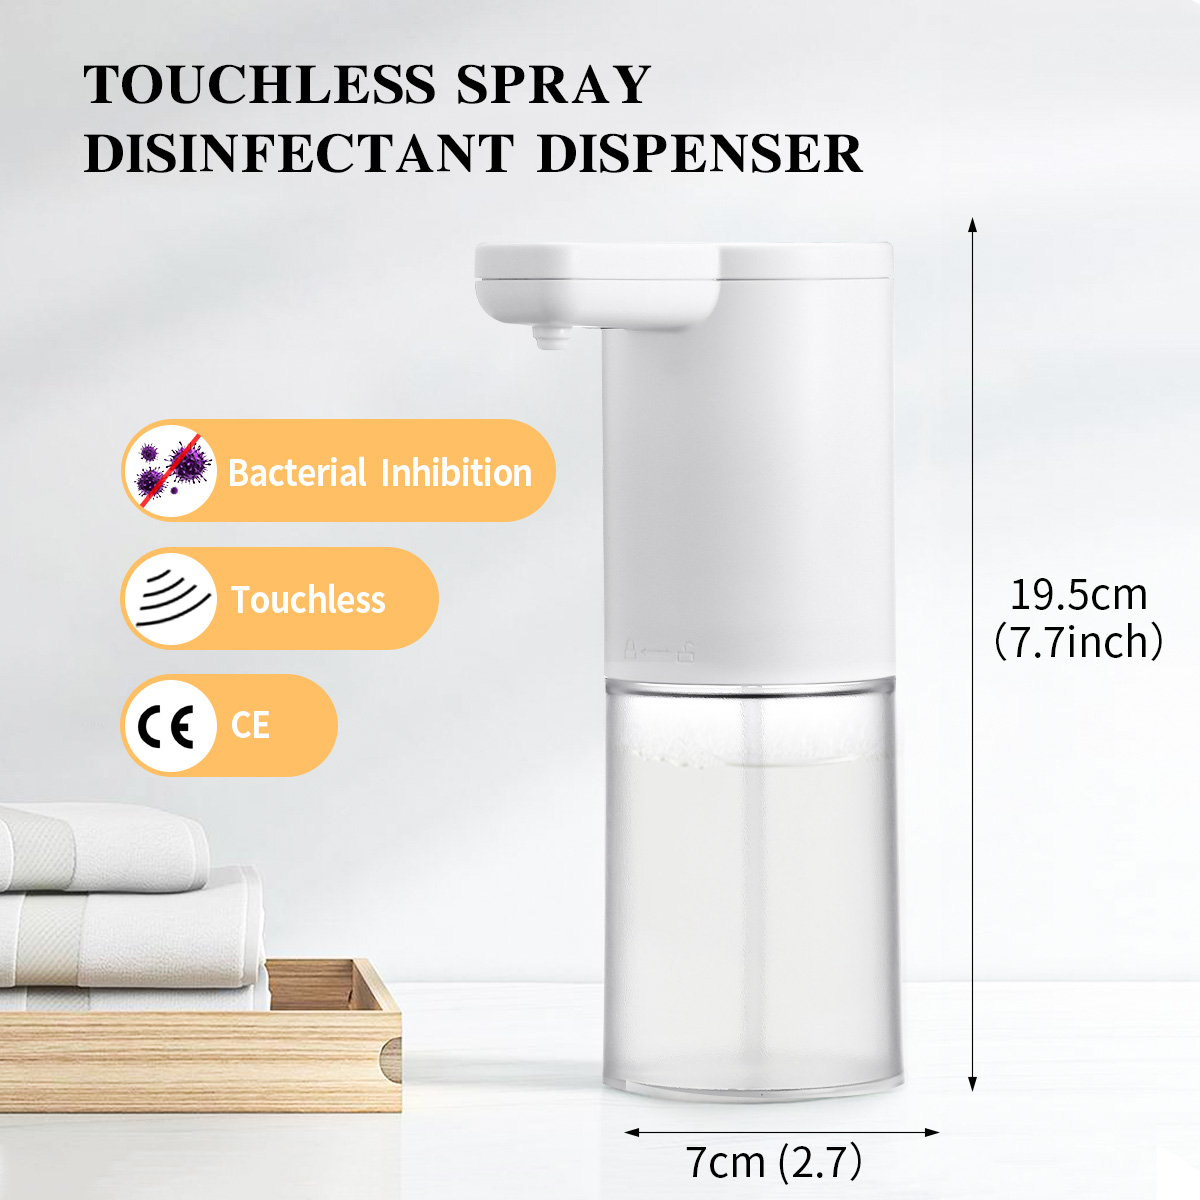 KING-DO-WAY-280ml-Automatic-Contactless-Soap-Dispenser-280ml-Smart-Touchless-Soap-Disinfectant-Dispe-1890640-8